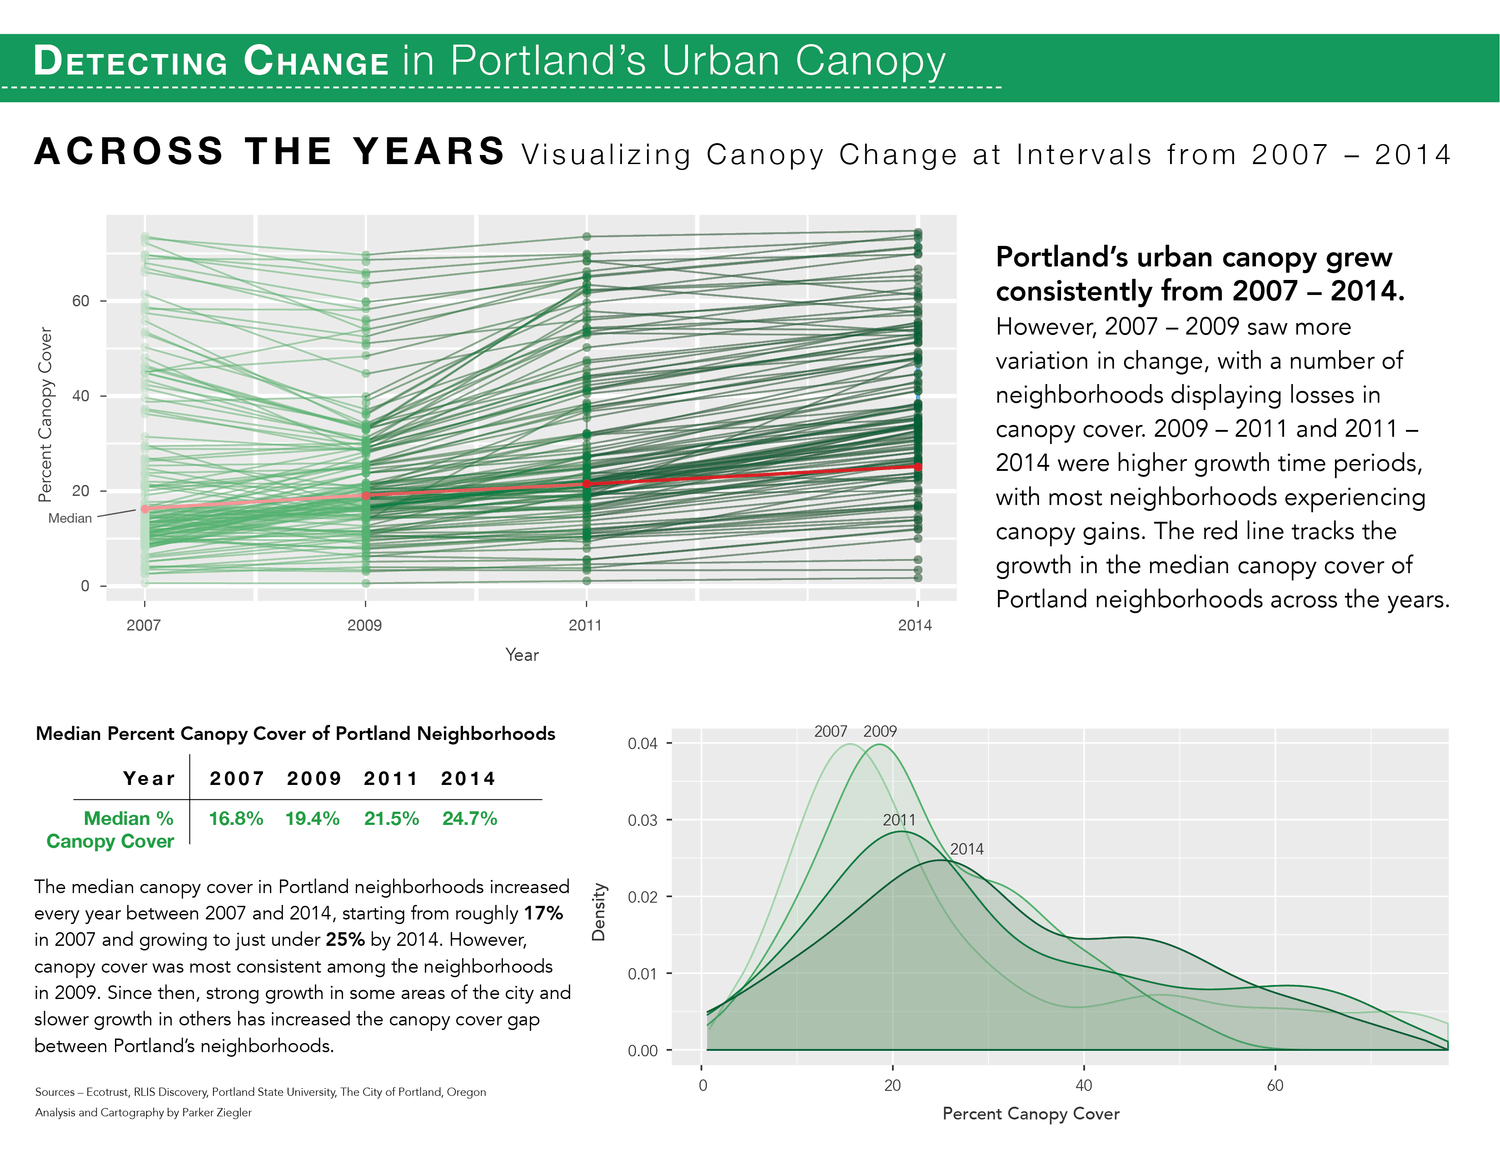 A summary report examining the rate of growth of Portland's urban canopy at 2 year intervals between 2007 and 2014.